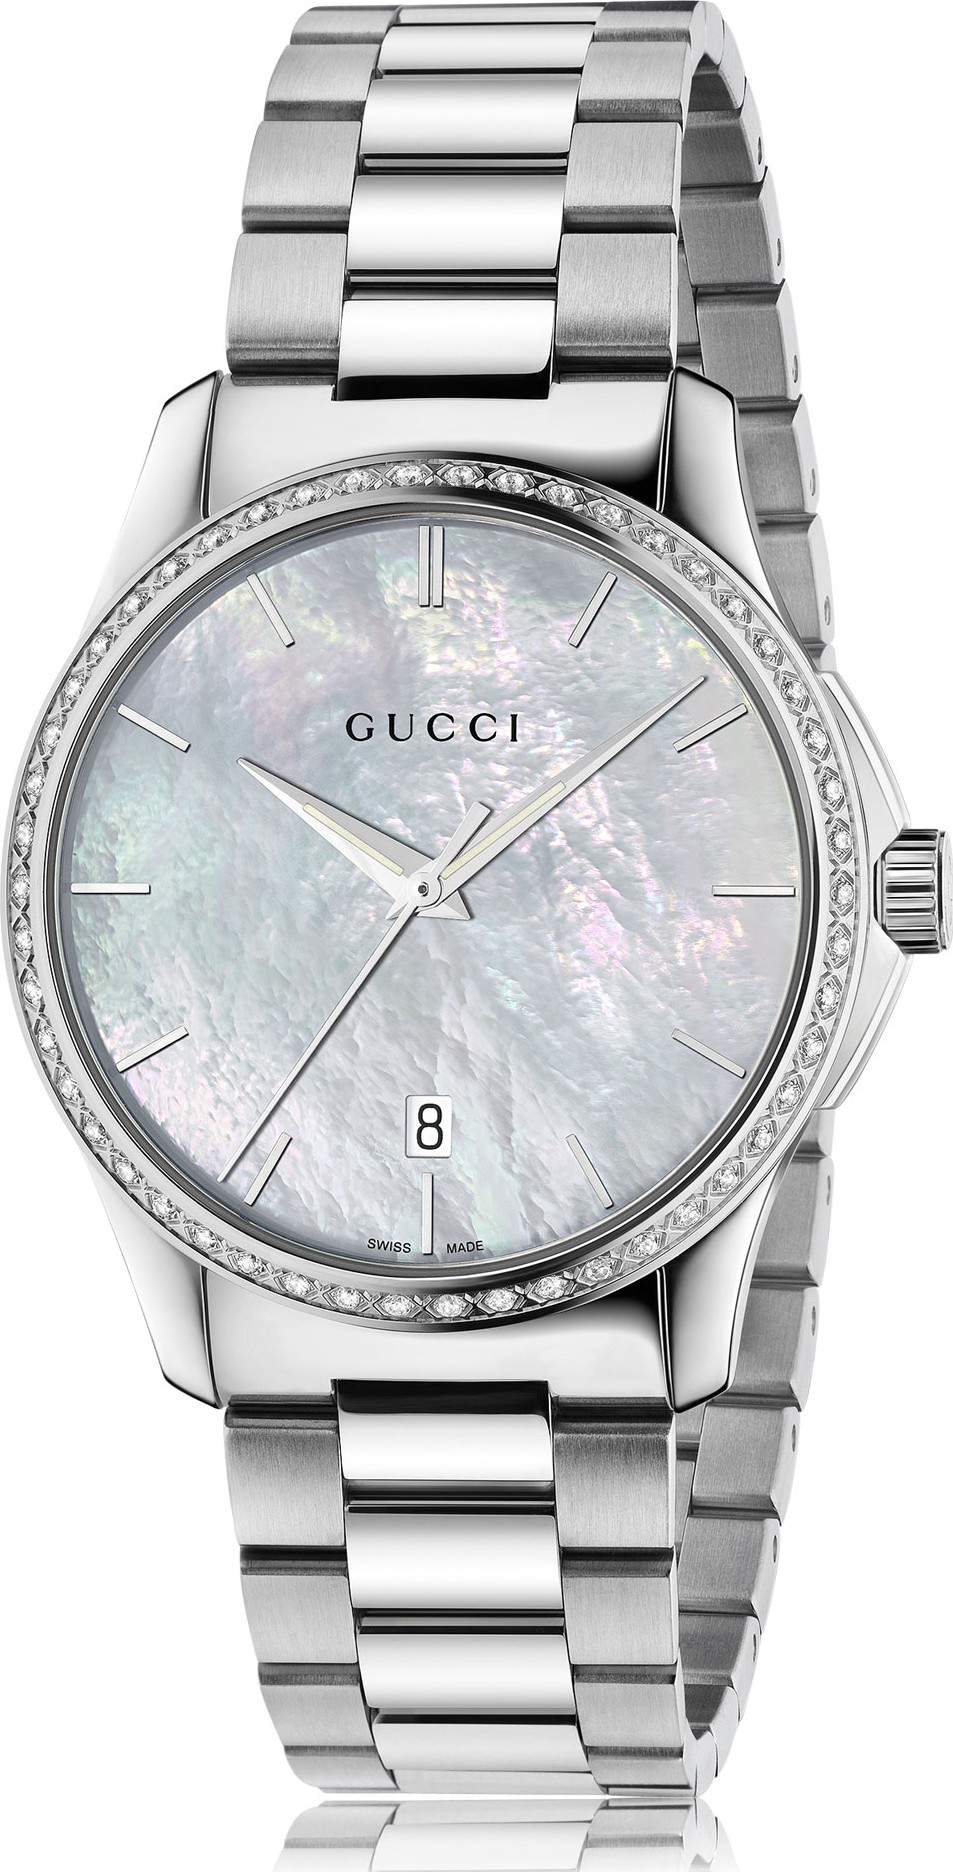 Arriba 58+ imagen gucci mother of pearl watch